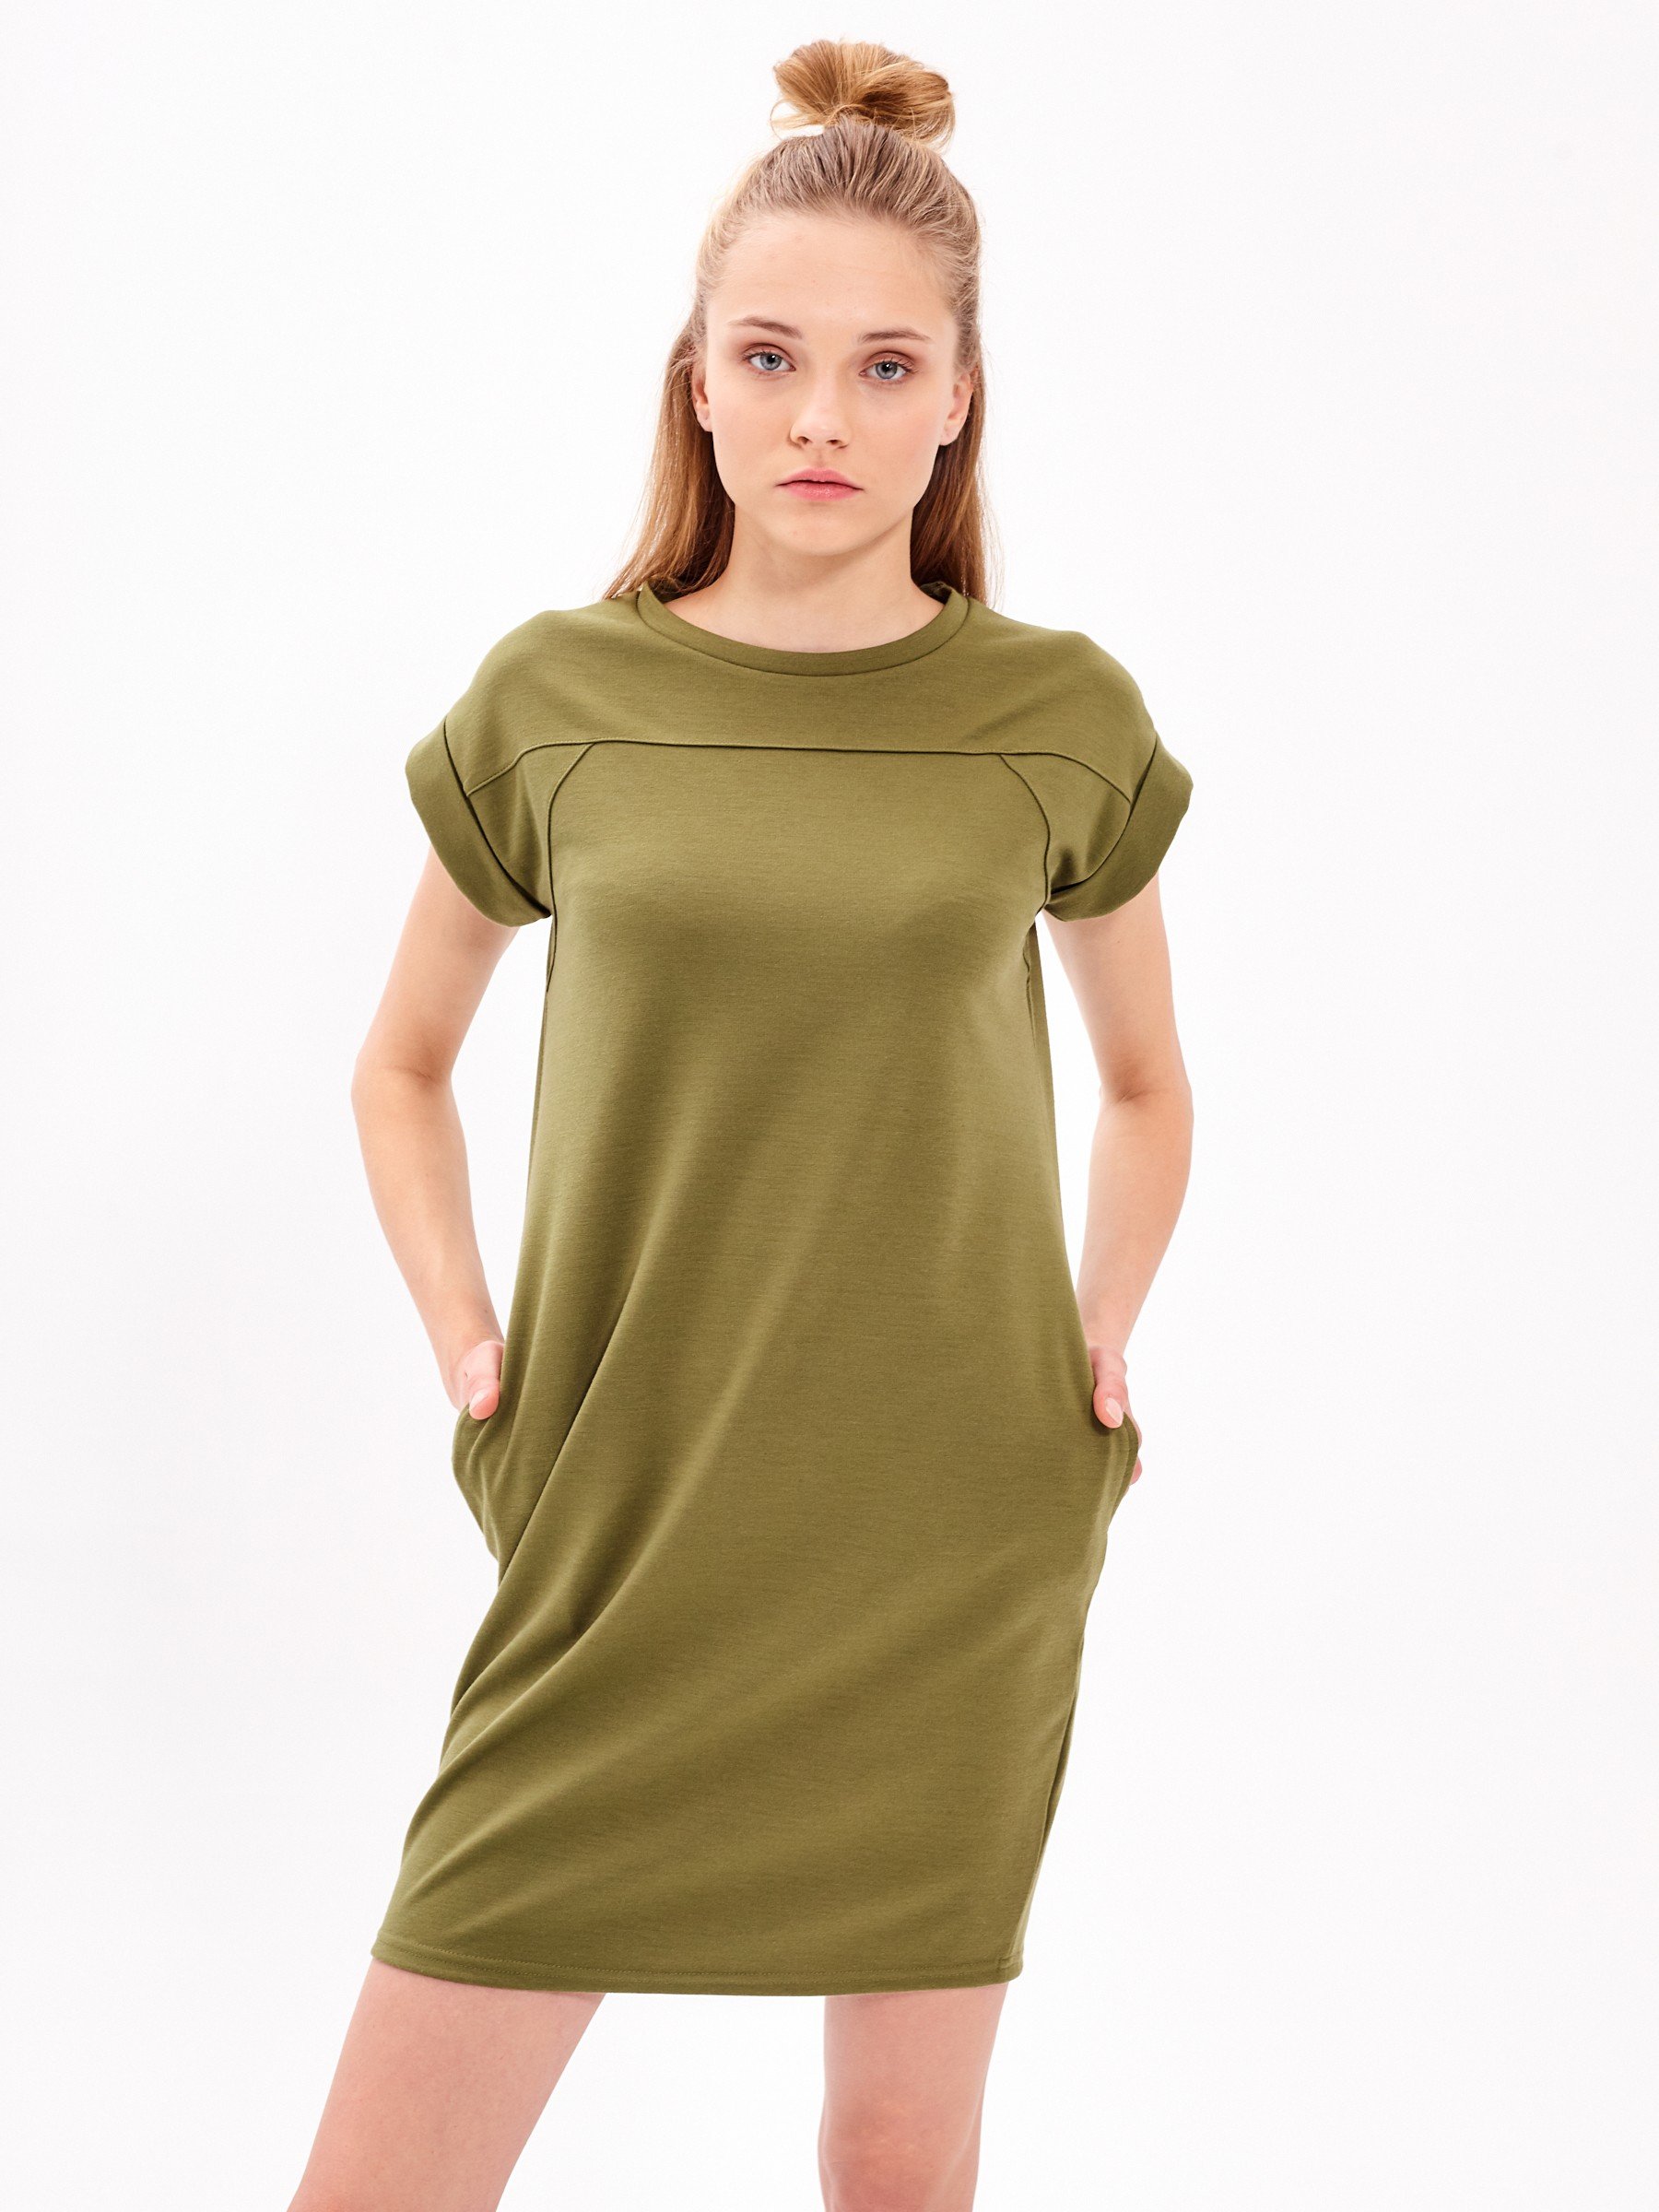 T-shirt dress with side pockets | GATE